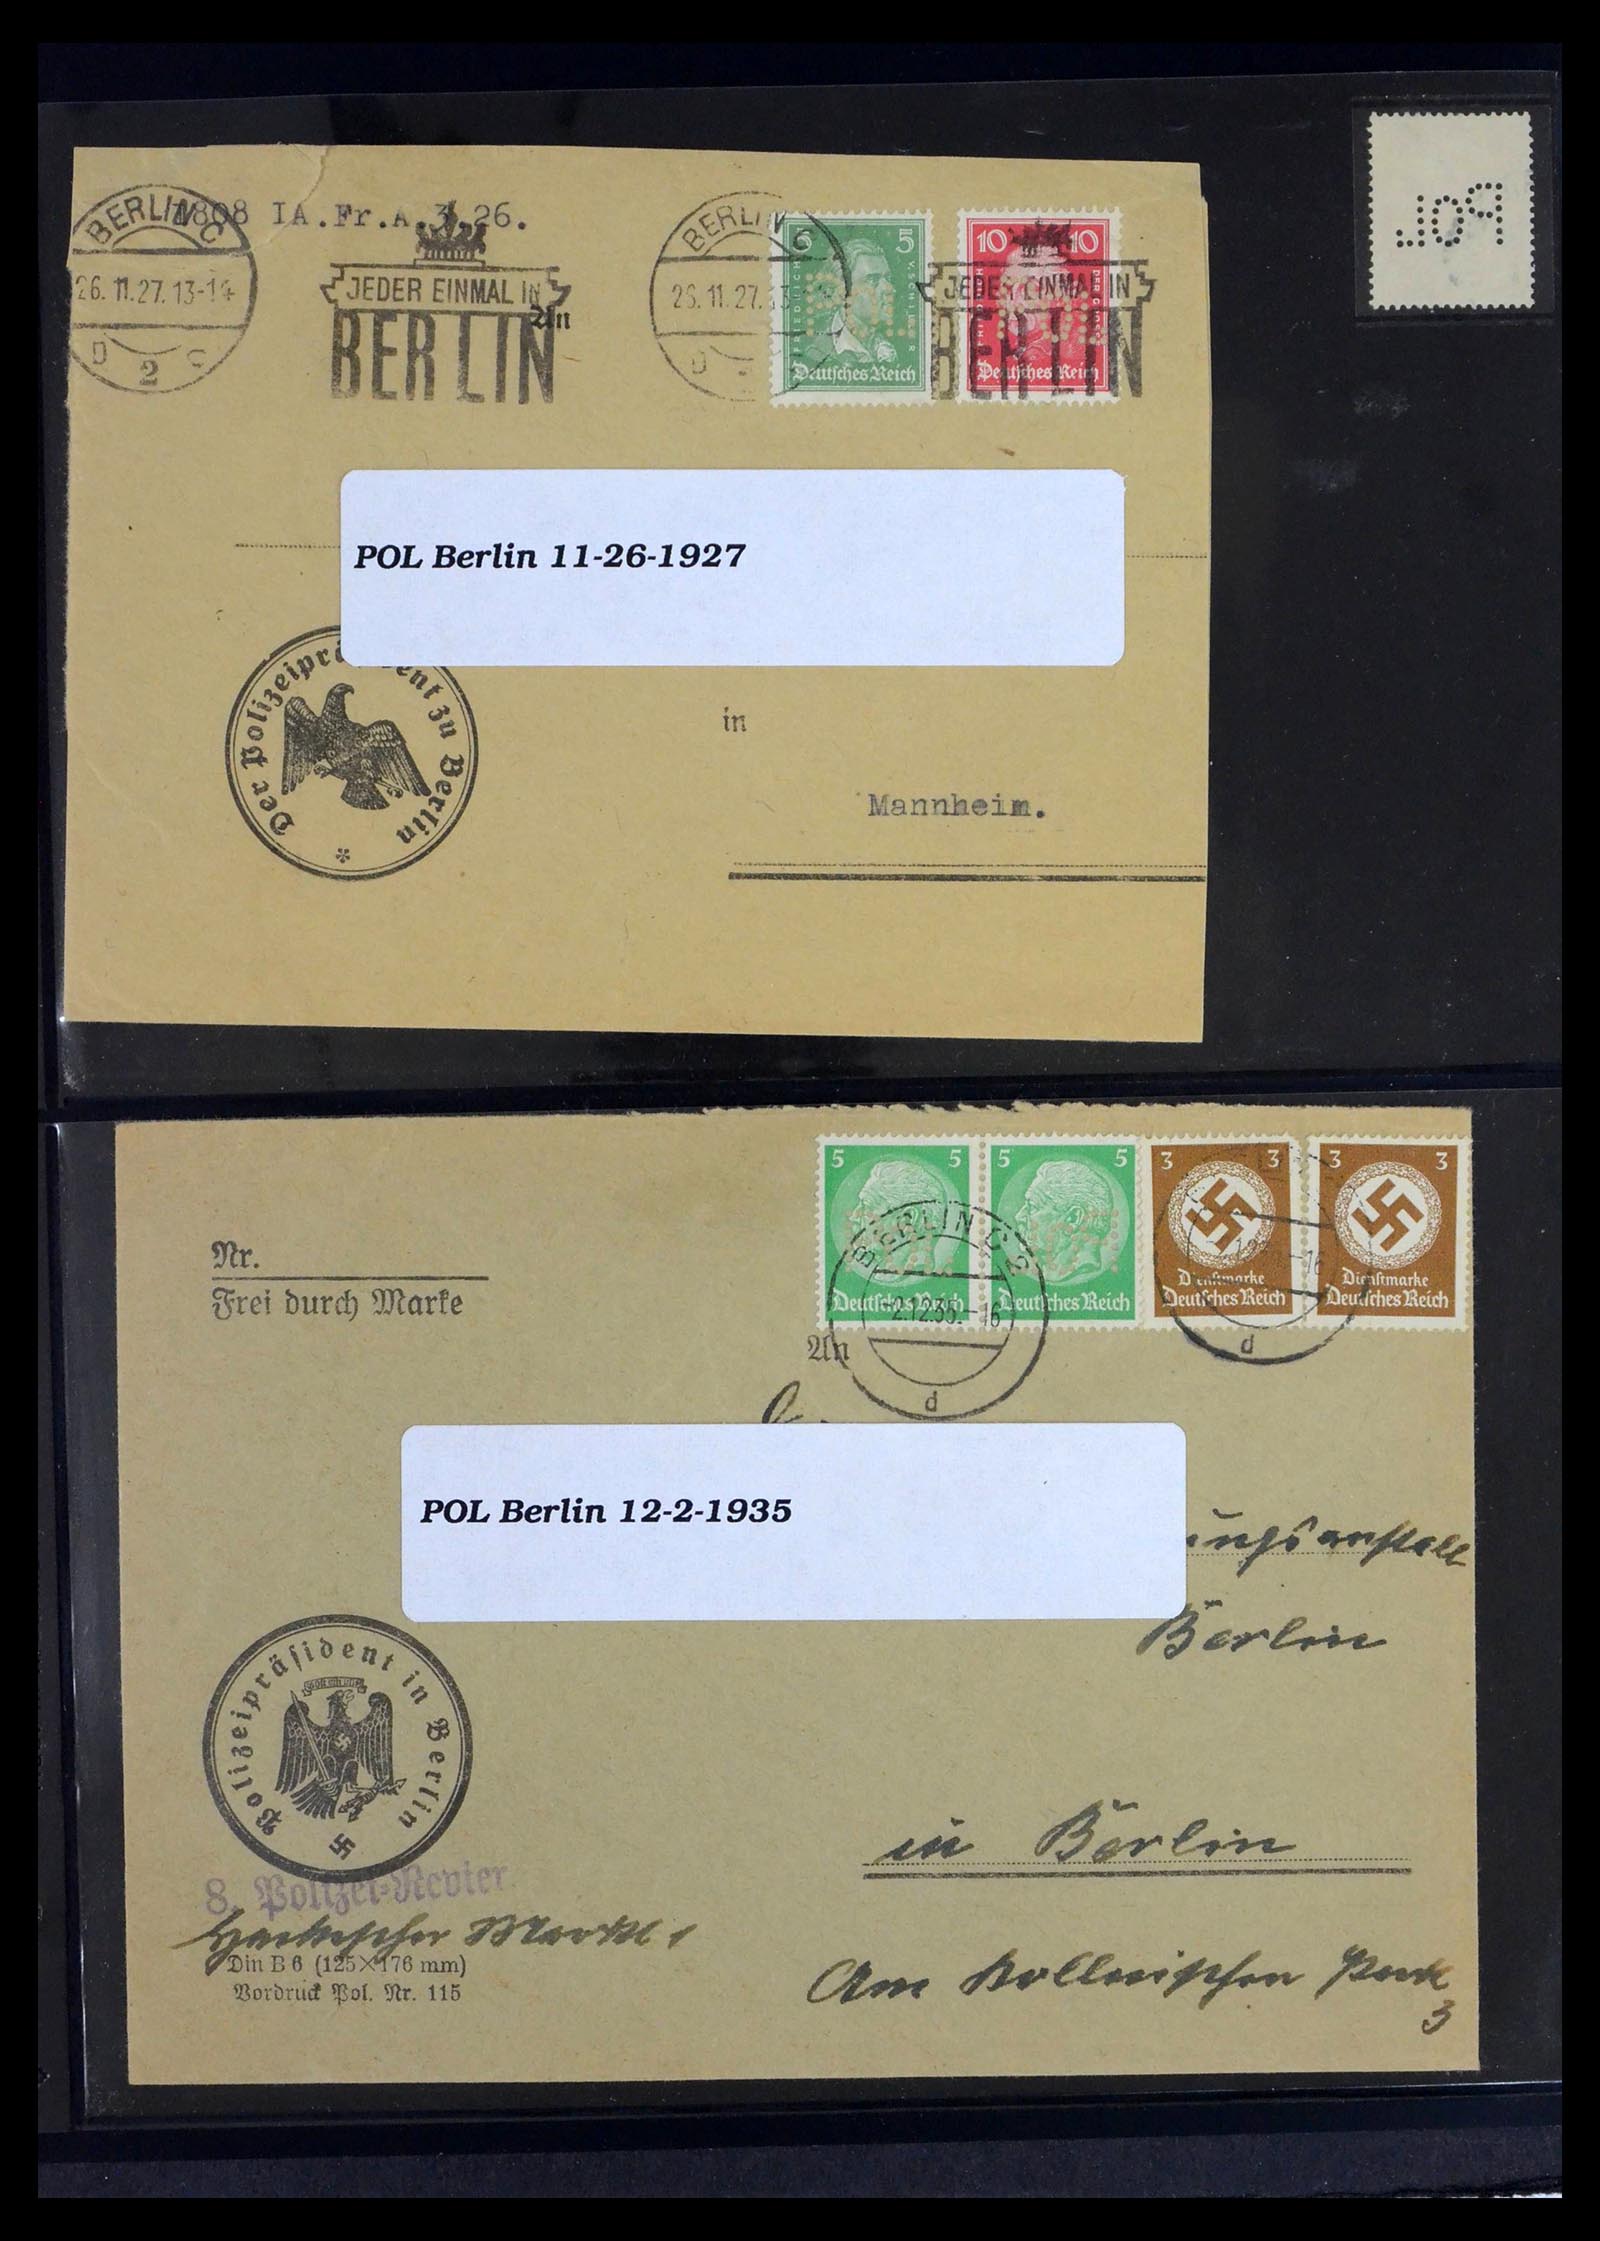 39458 0005 - Stamp collection 39458 Germany POL lochungen 1926-1955.